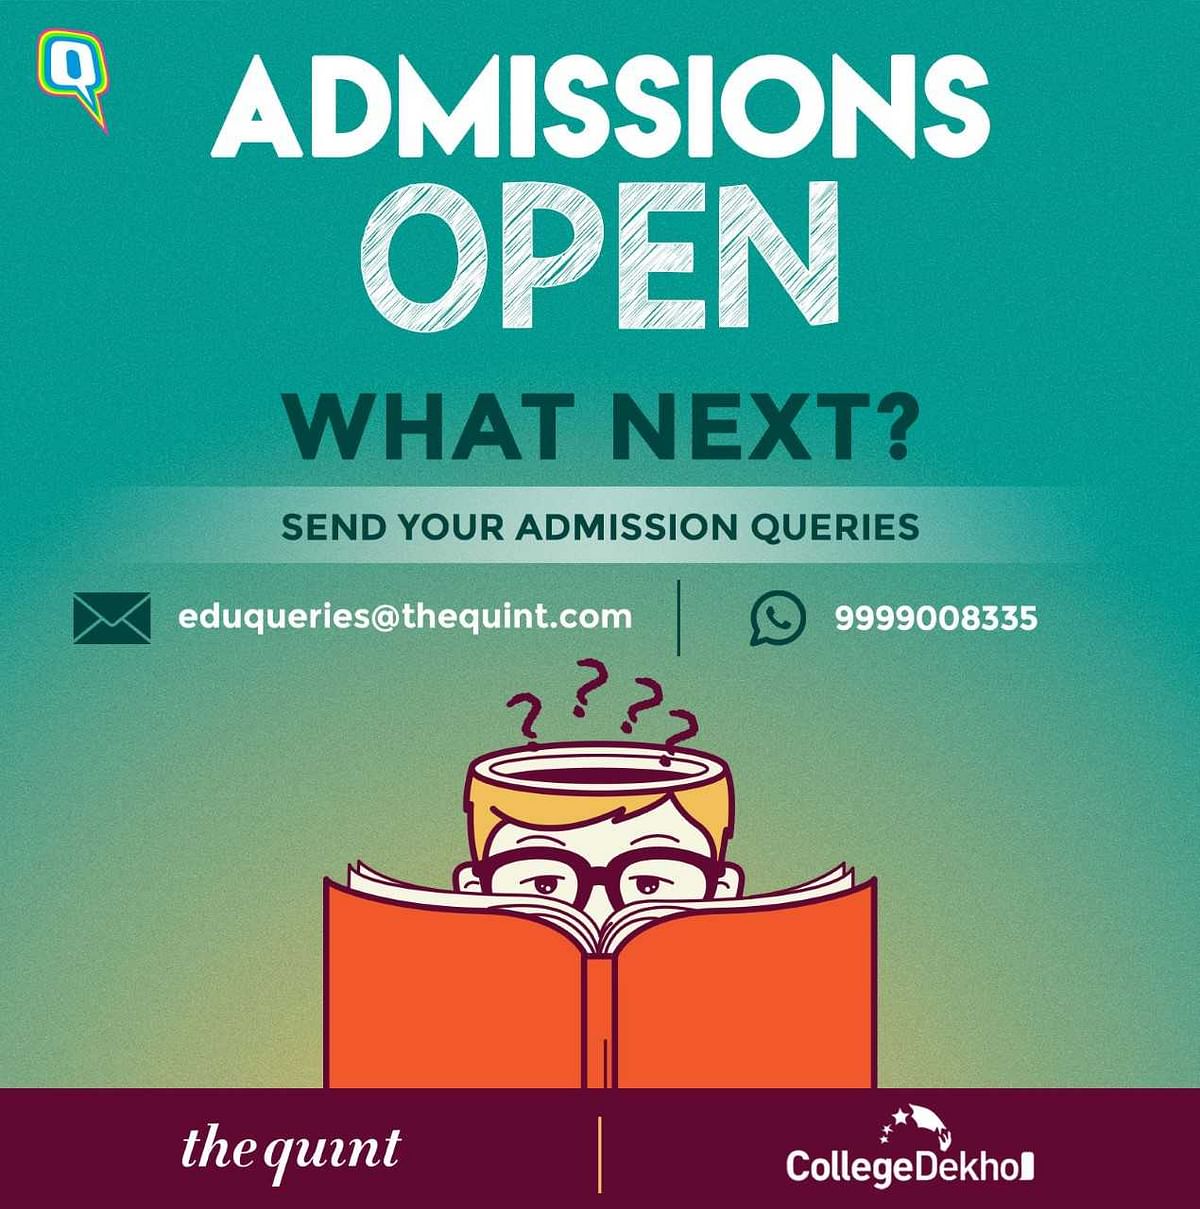 ‘Admissions Open’ is The Quint’s campaign along with educational counsellors from CollegeDekho.